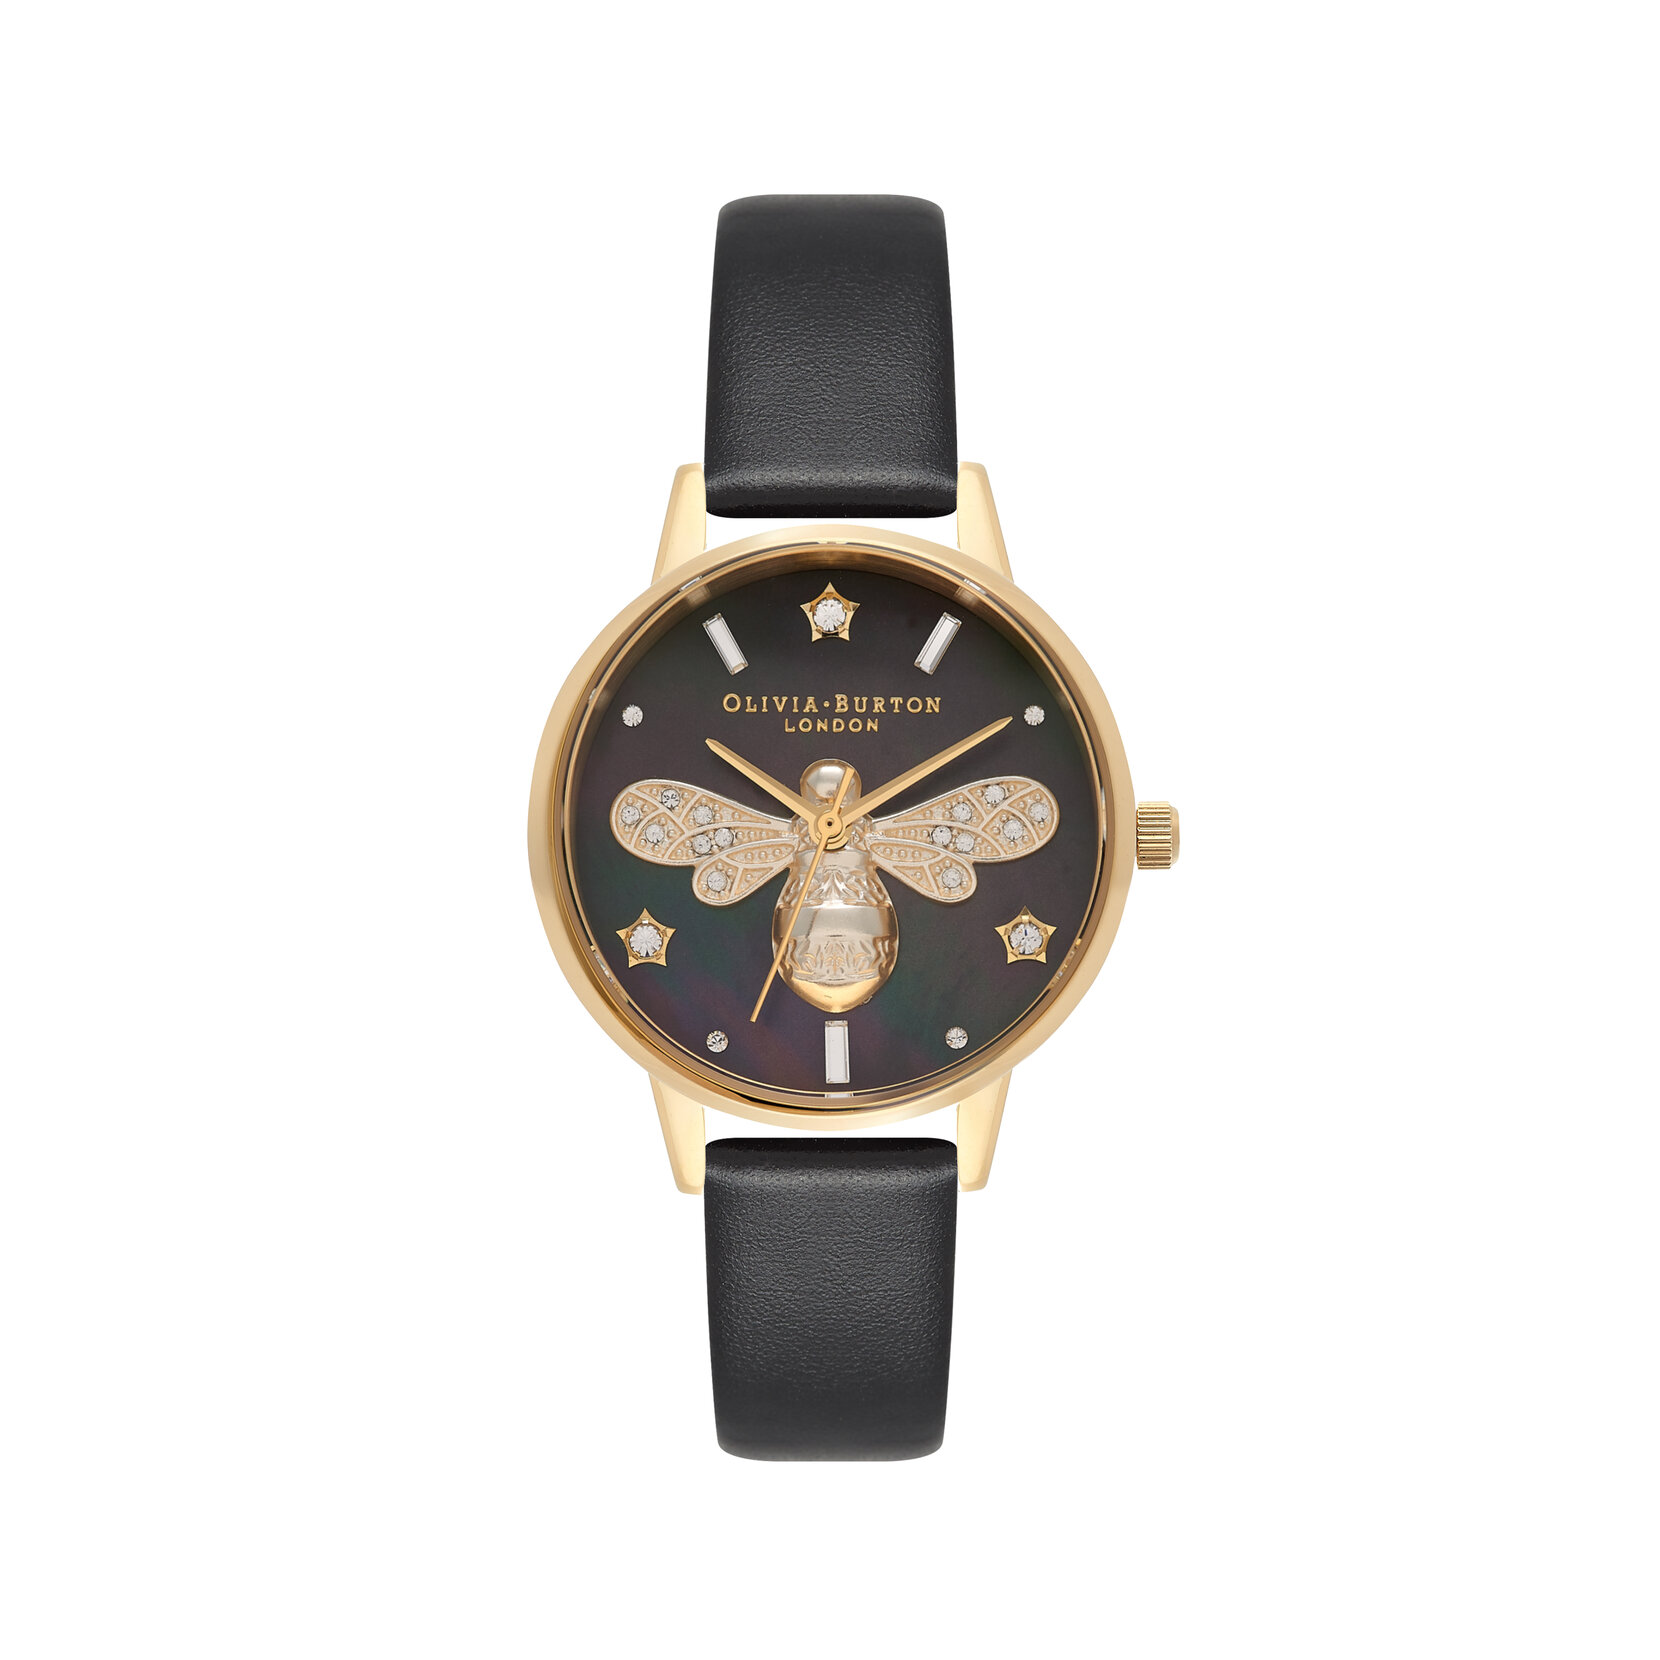 30mm Gold & Black Leather Strap Watch